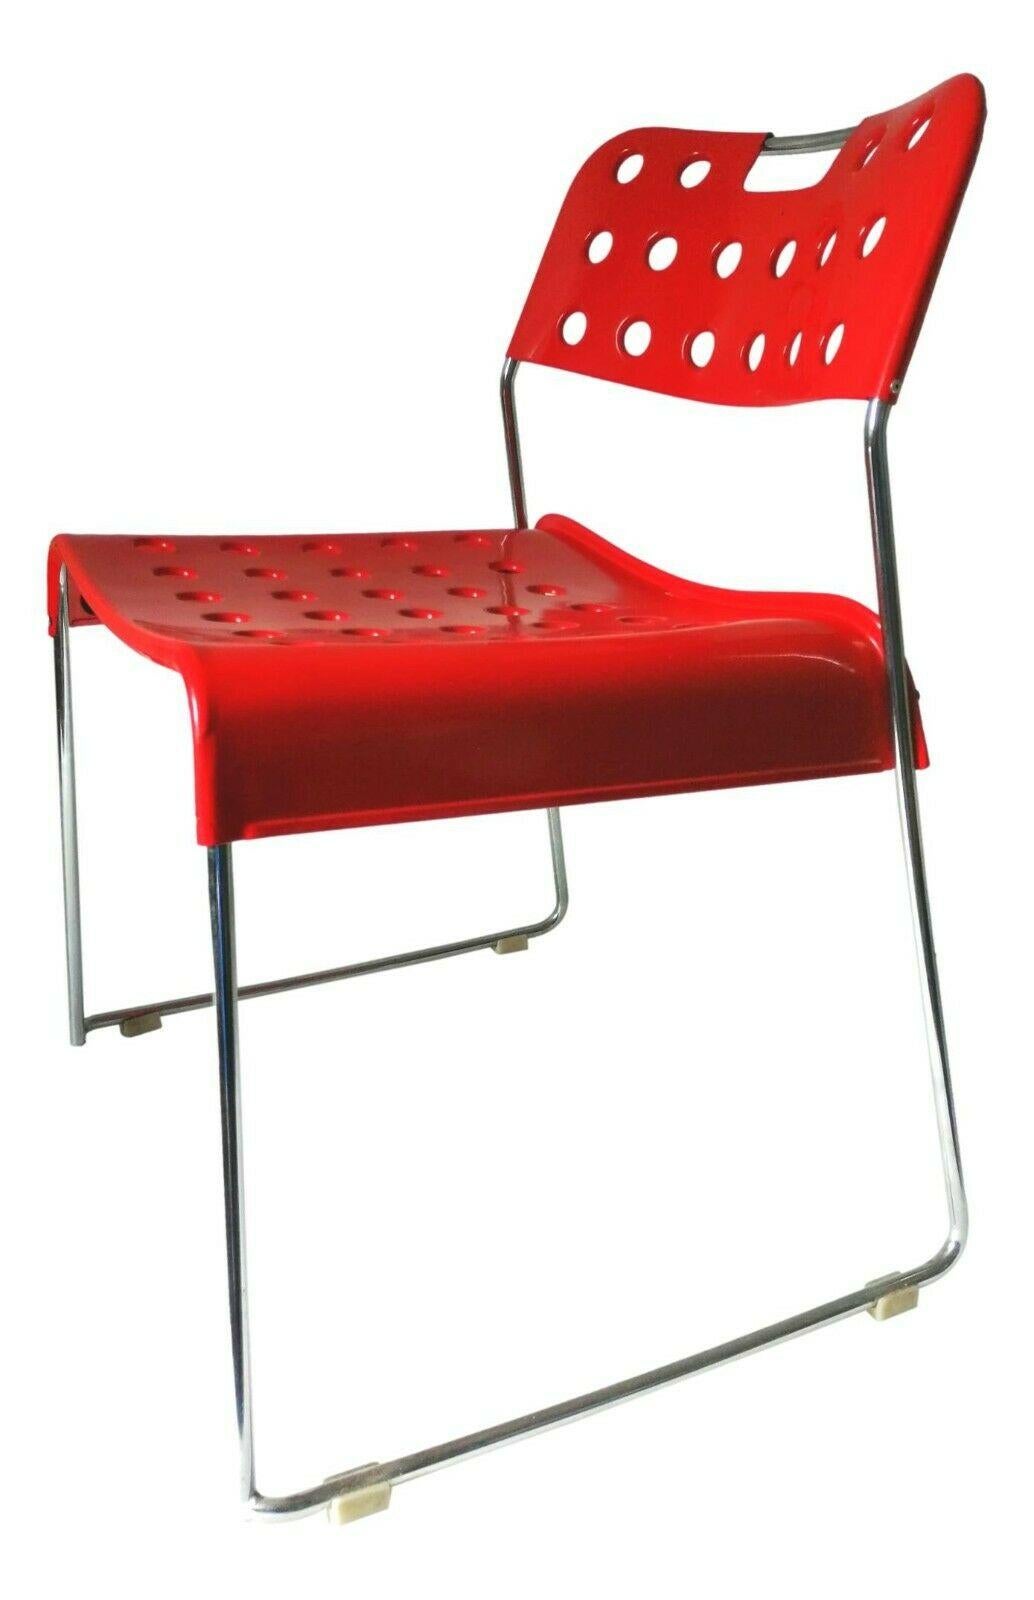 Historic OMK omstak chair, designed in the late 70s by Rodney Kinsman for bieffeplast in padova

made on chromed steel structure, seat and back in perforated sheet metal painted in red

It measures 74 cm in height, 53 cm in width, 50 cm in depth